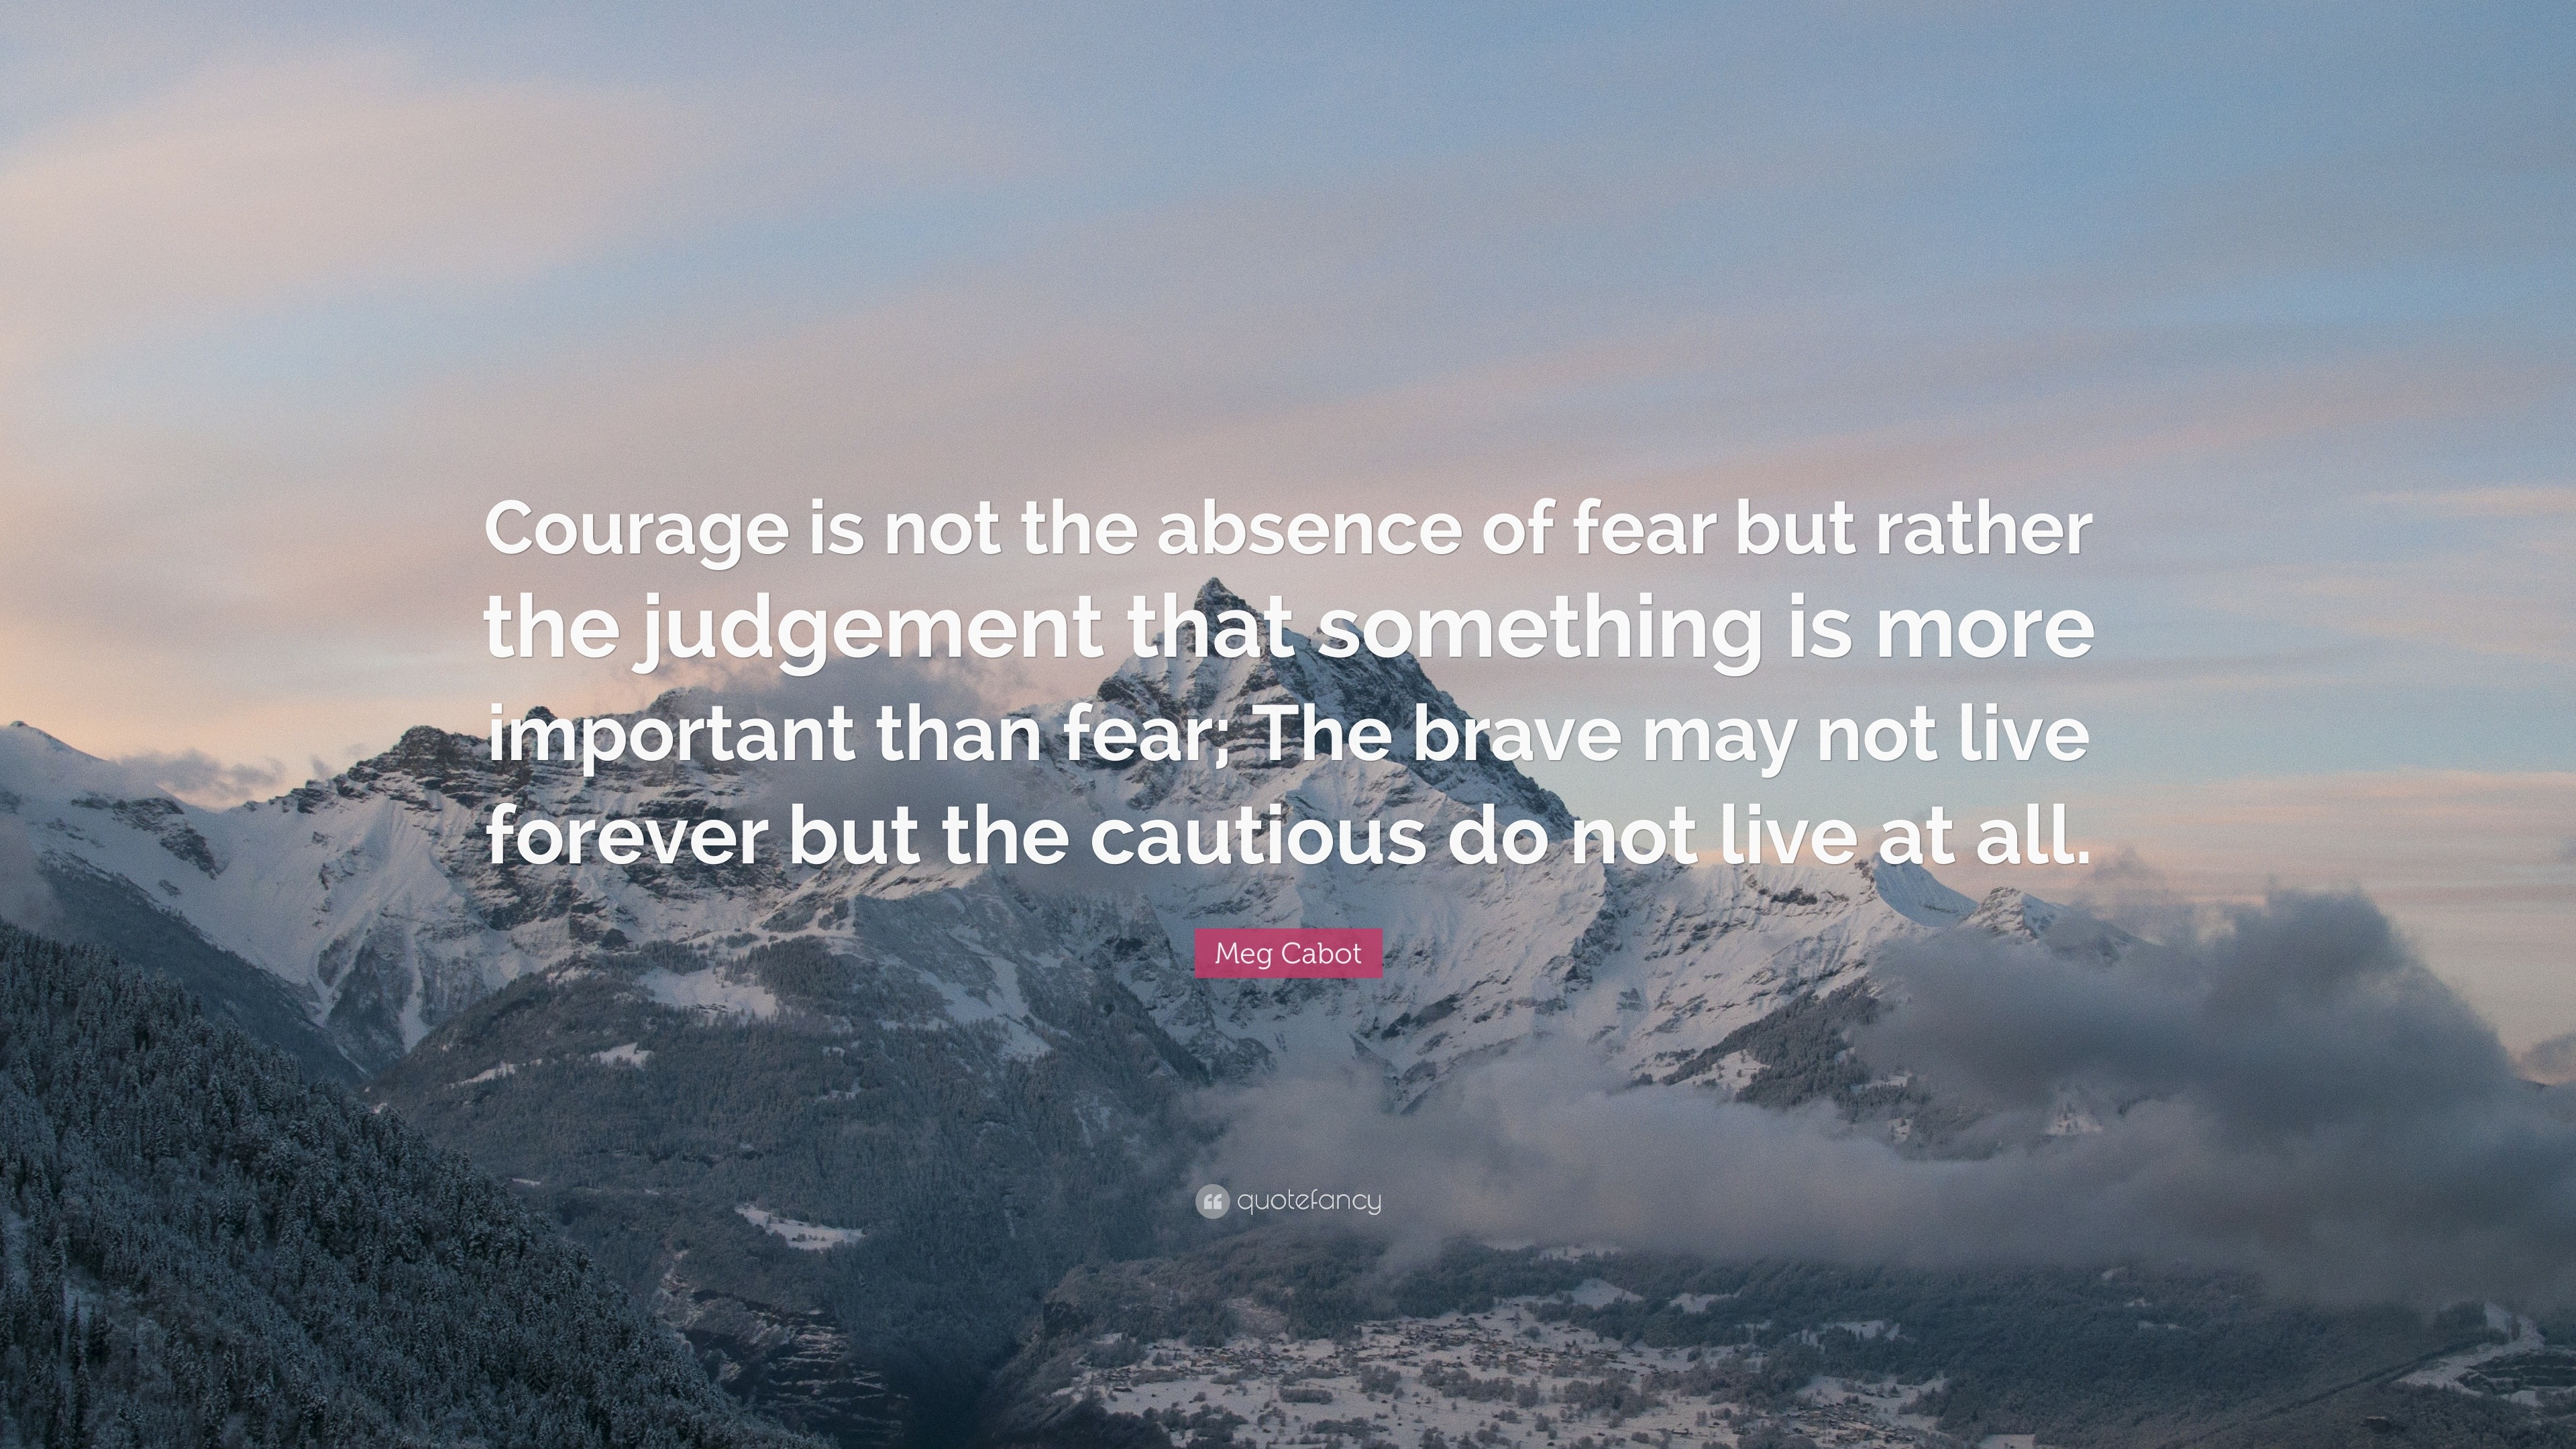 Meg Cabot Quote: “Courage is not the absence of fear but rather the ...